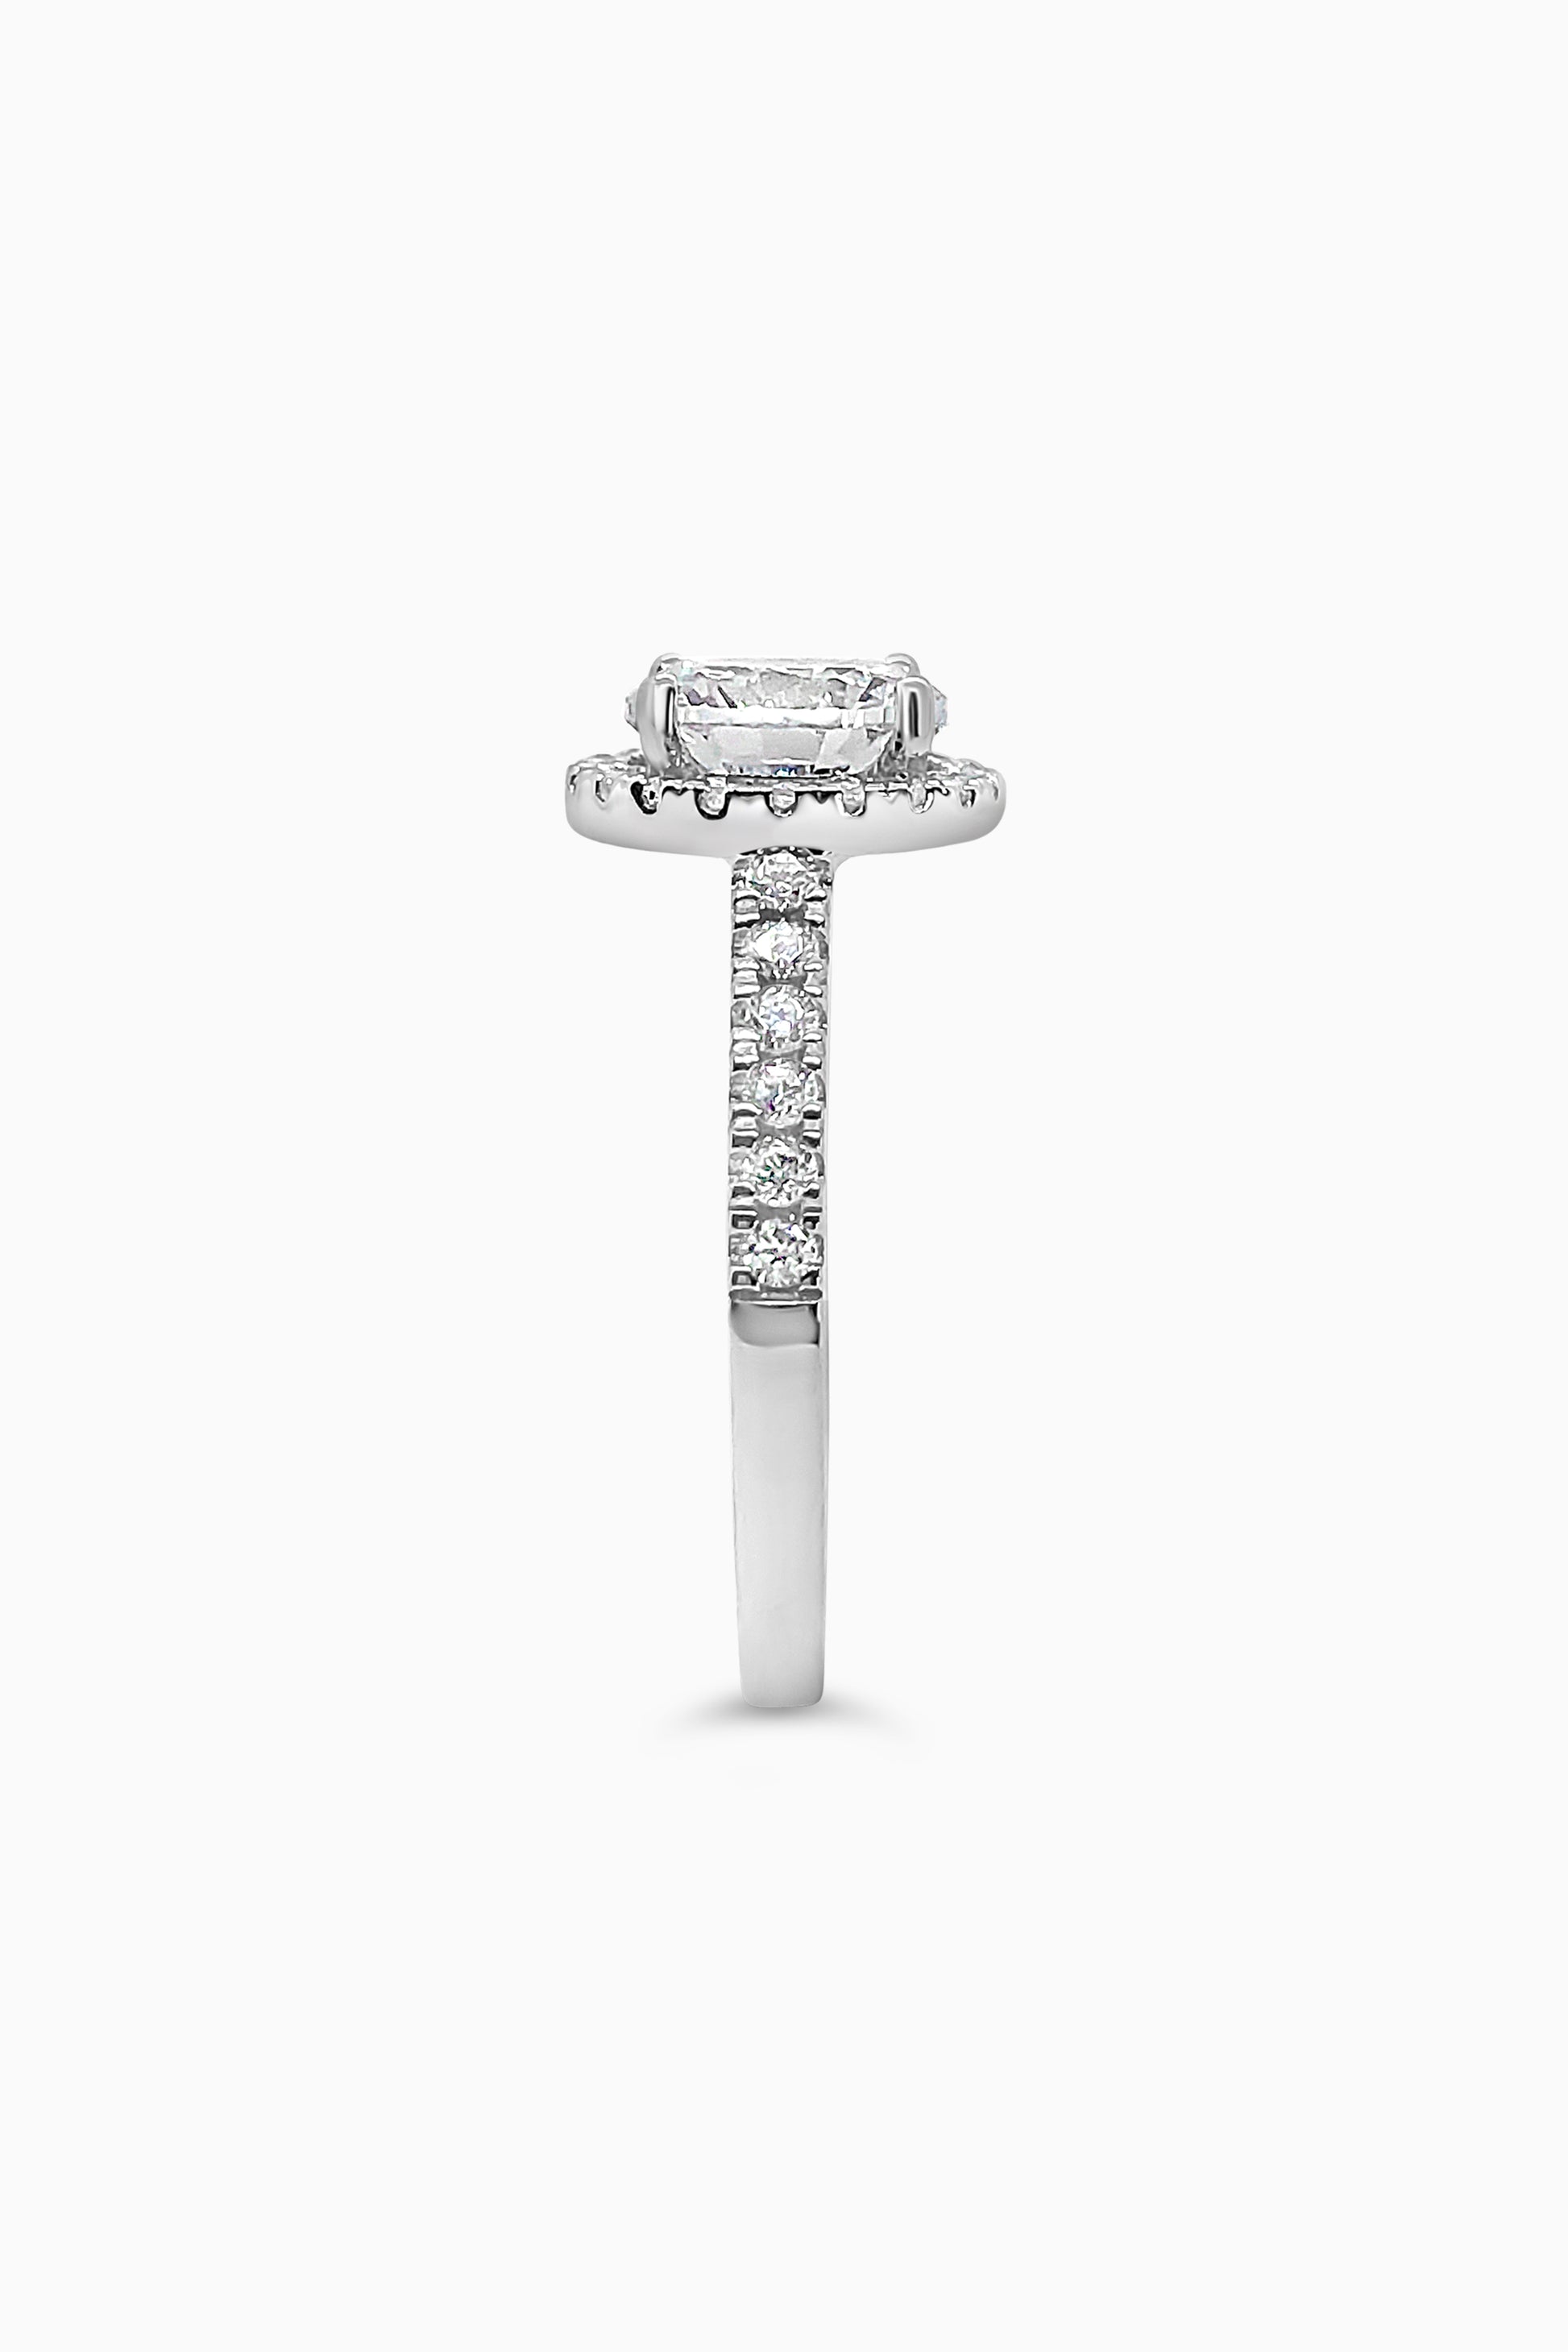 White Gold round cut stone surrounded by a Square Halo and Pavé band - Other Side View